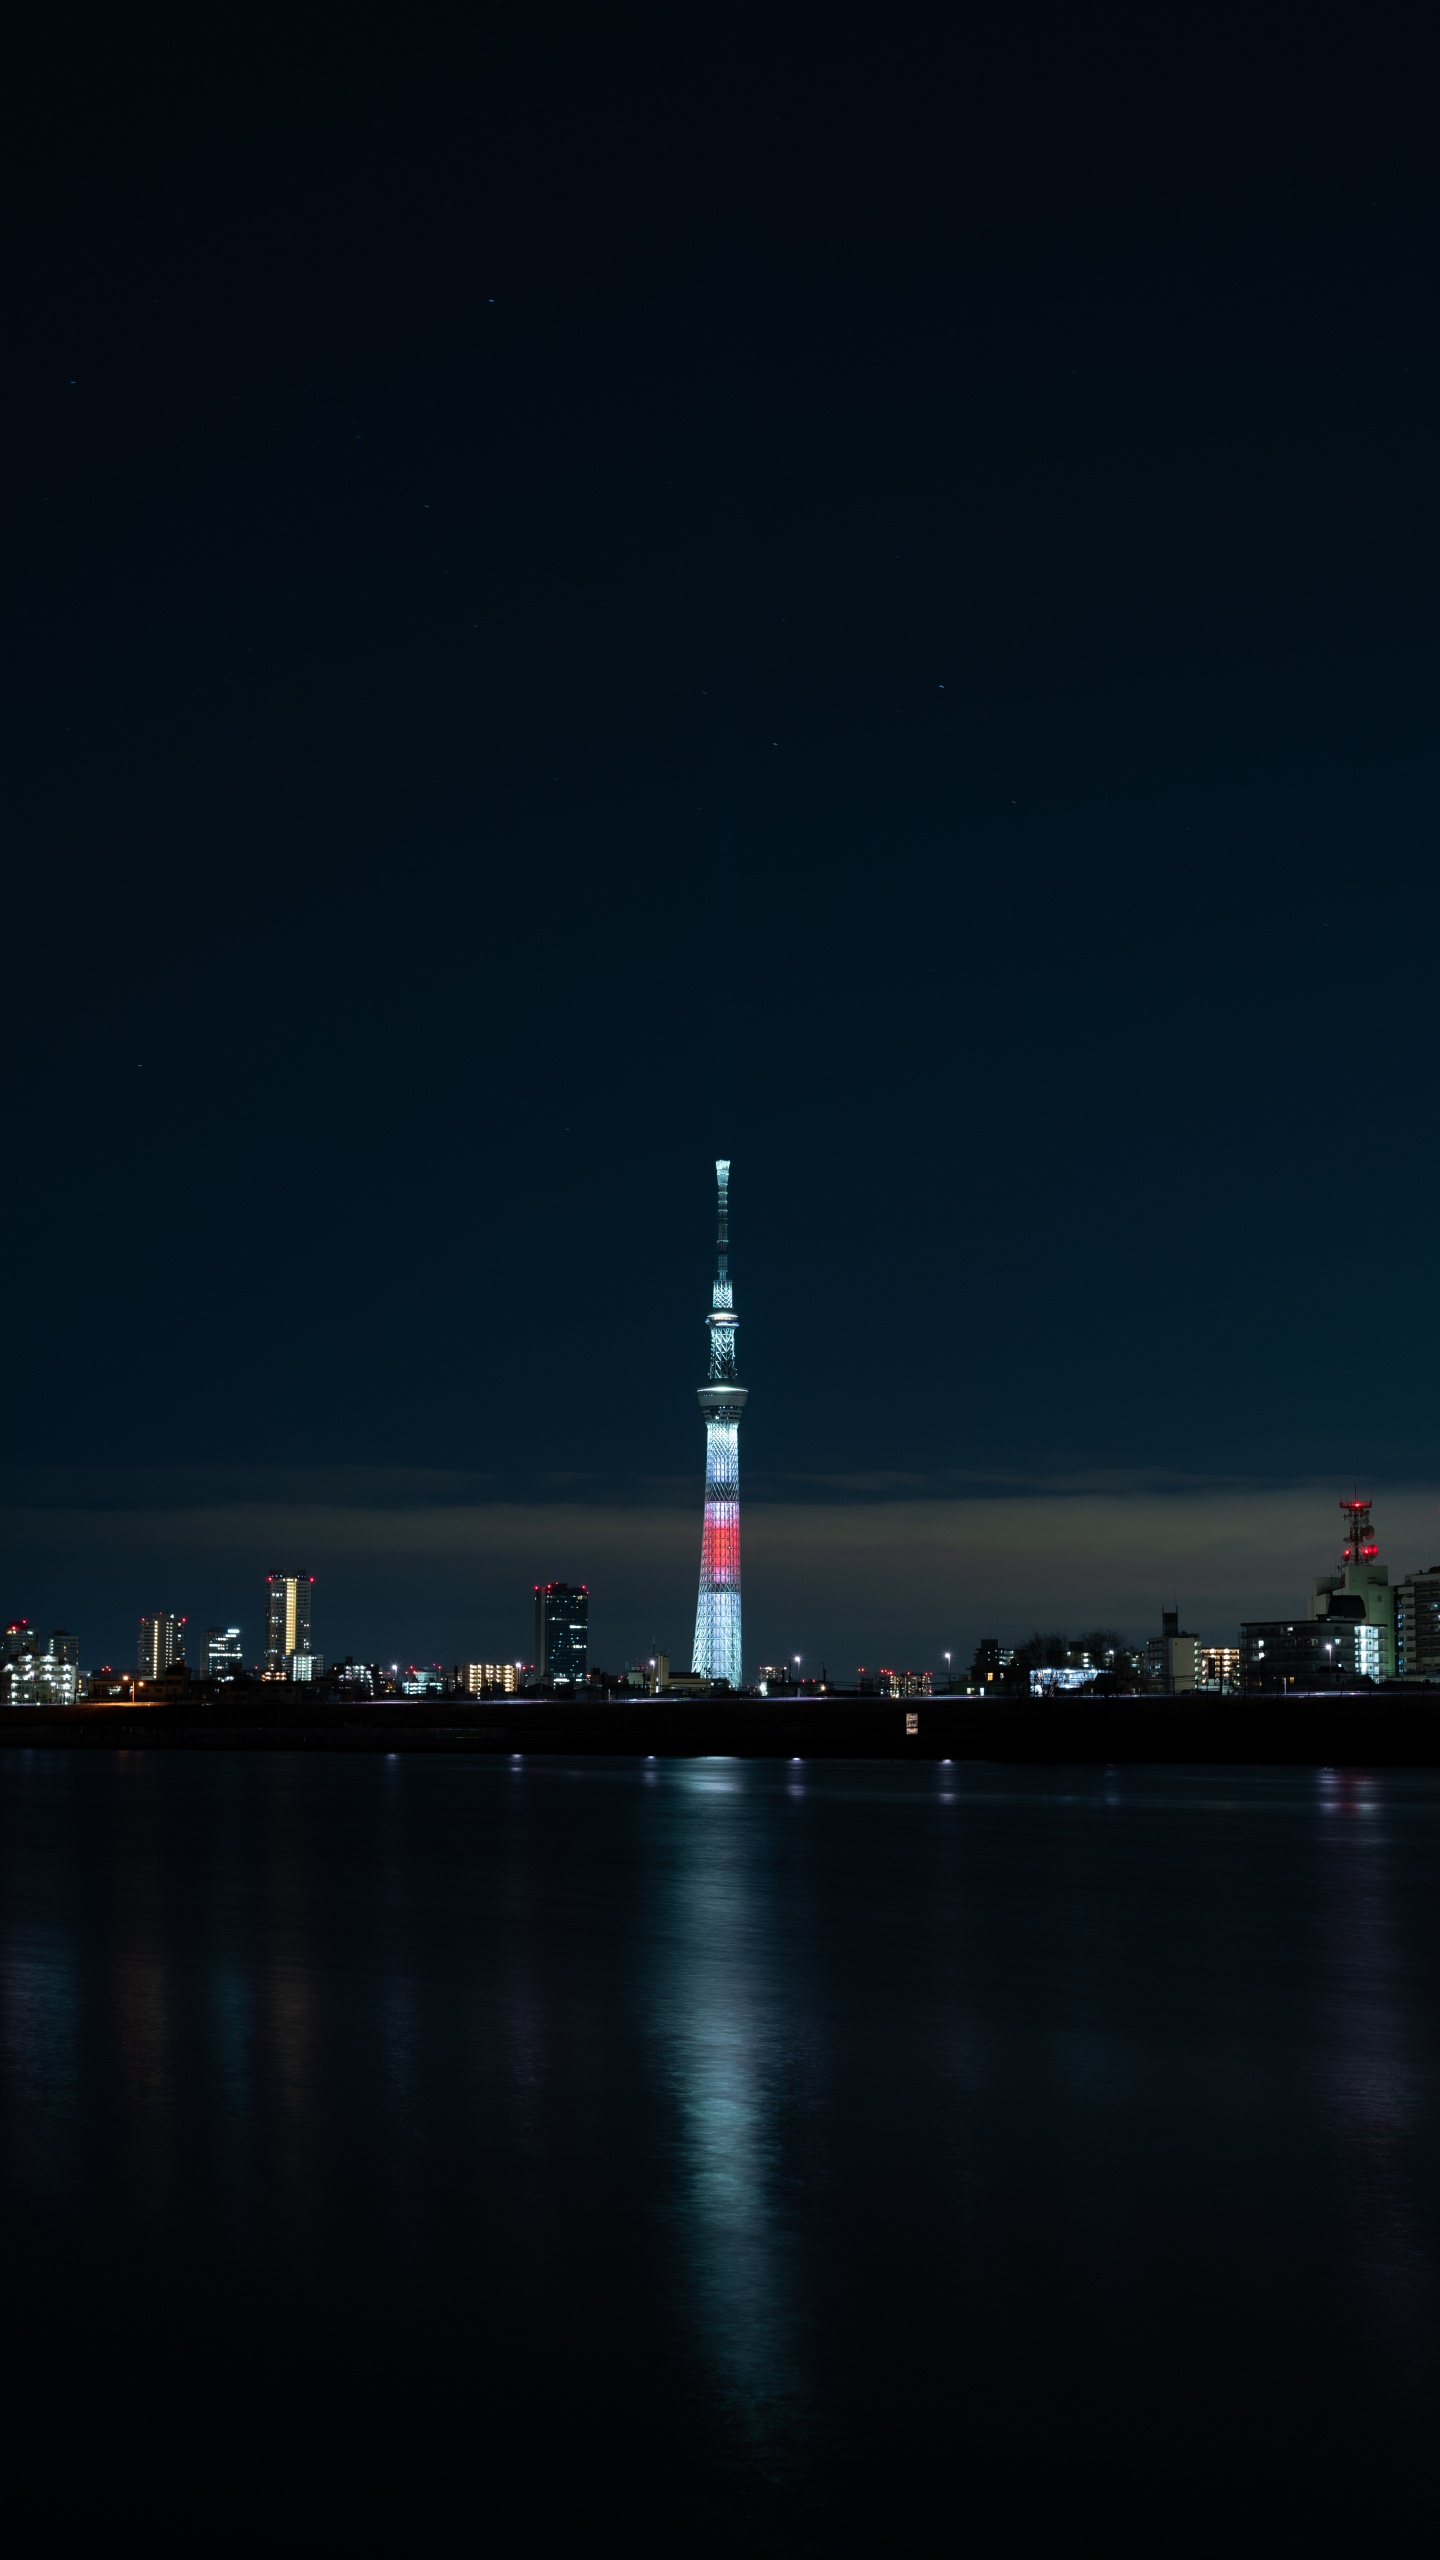 White and Red Tower Near Body of Water During Night Time. Wallpaper in 1440x2560 Resolution